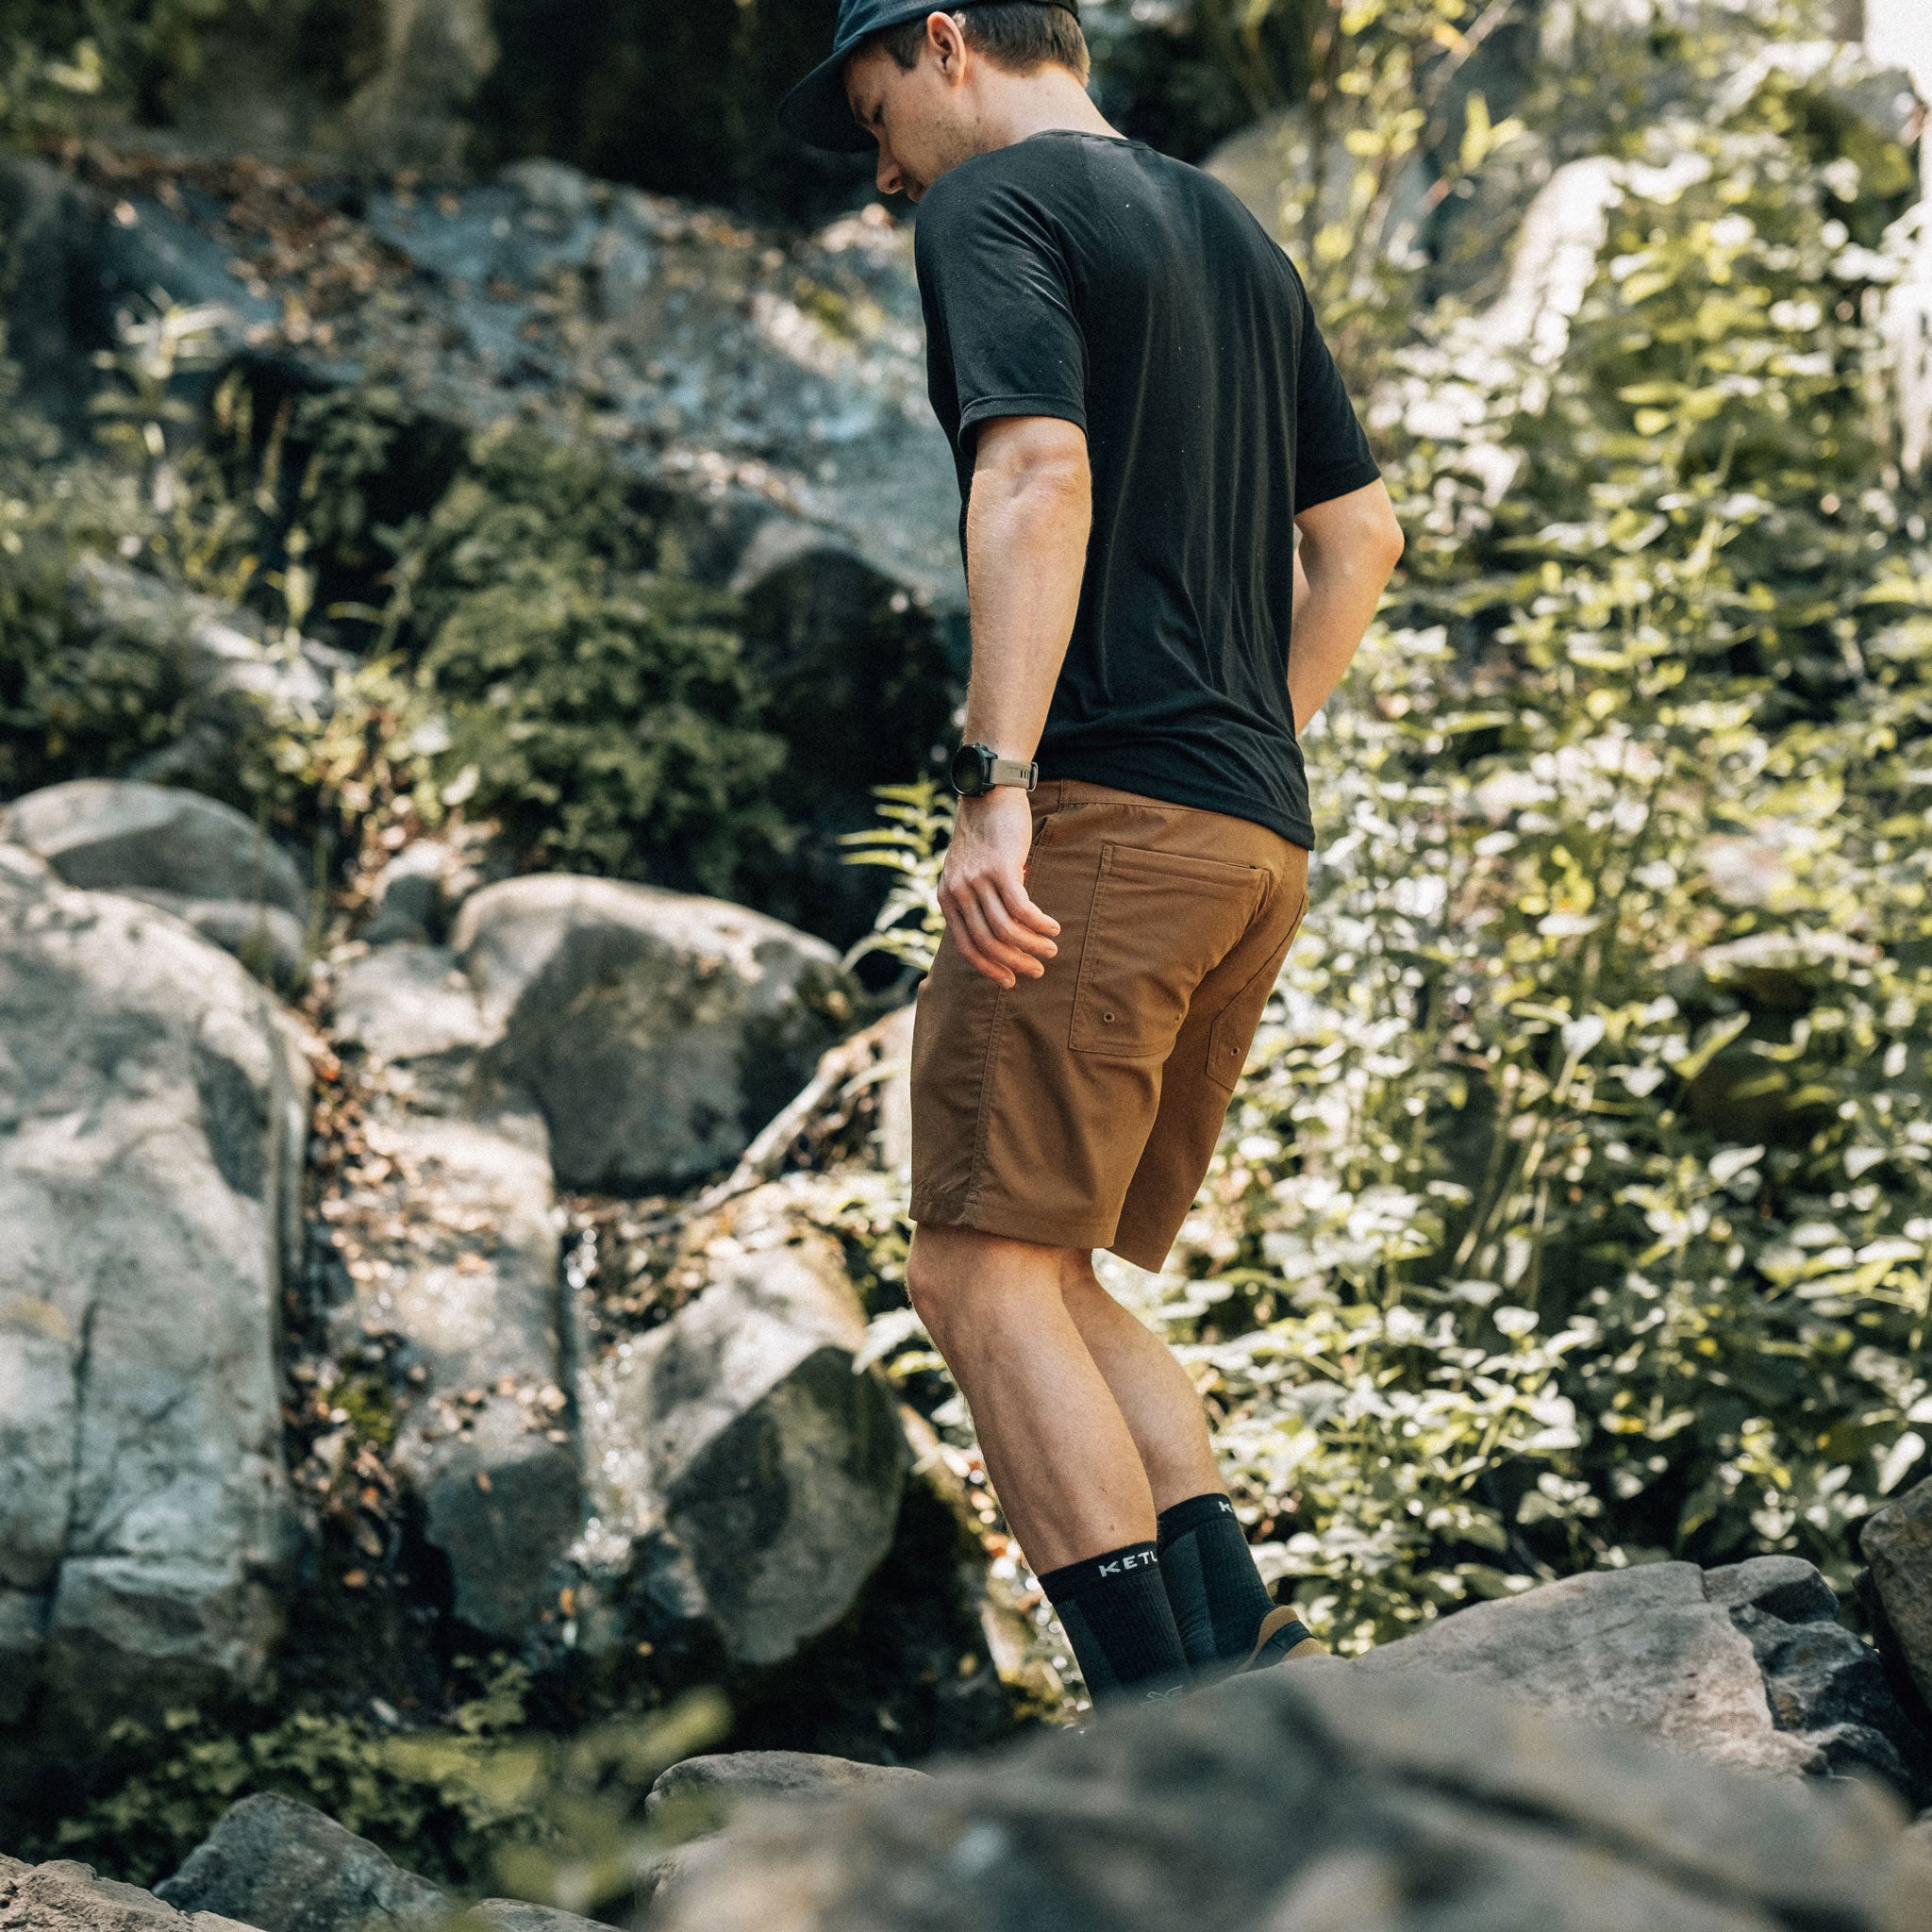 Hiking Shorts Outfit Shop Discounted